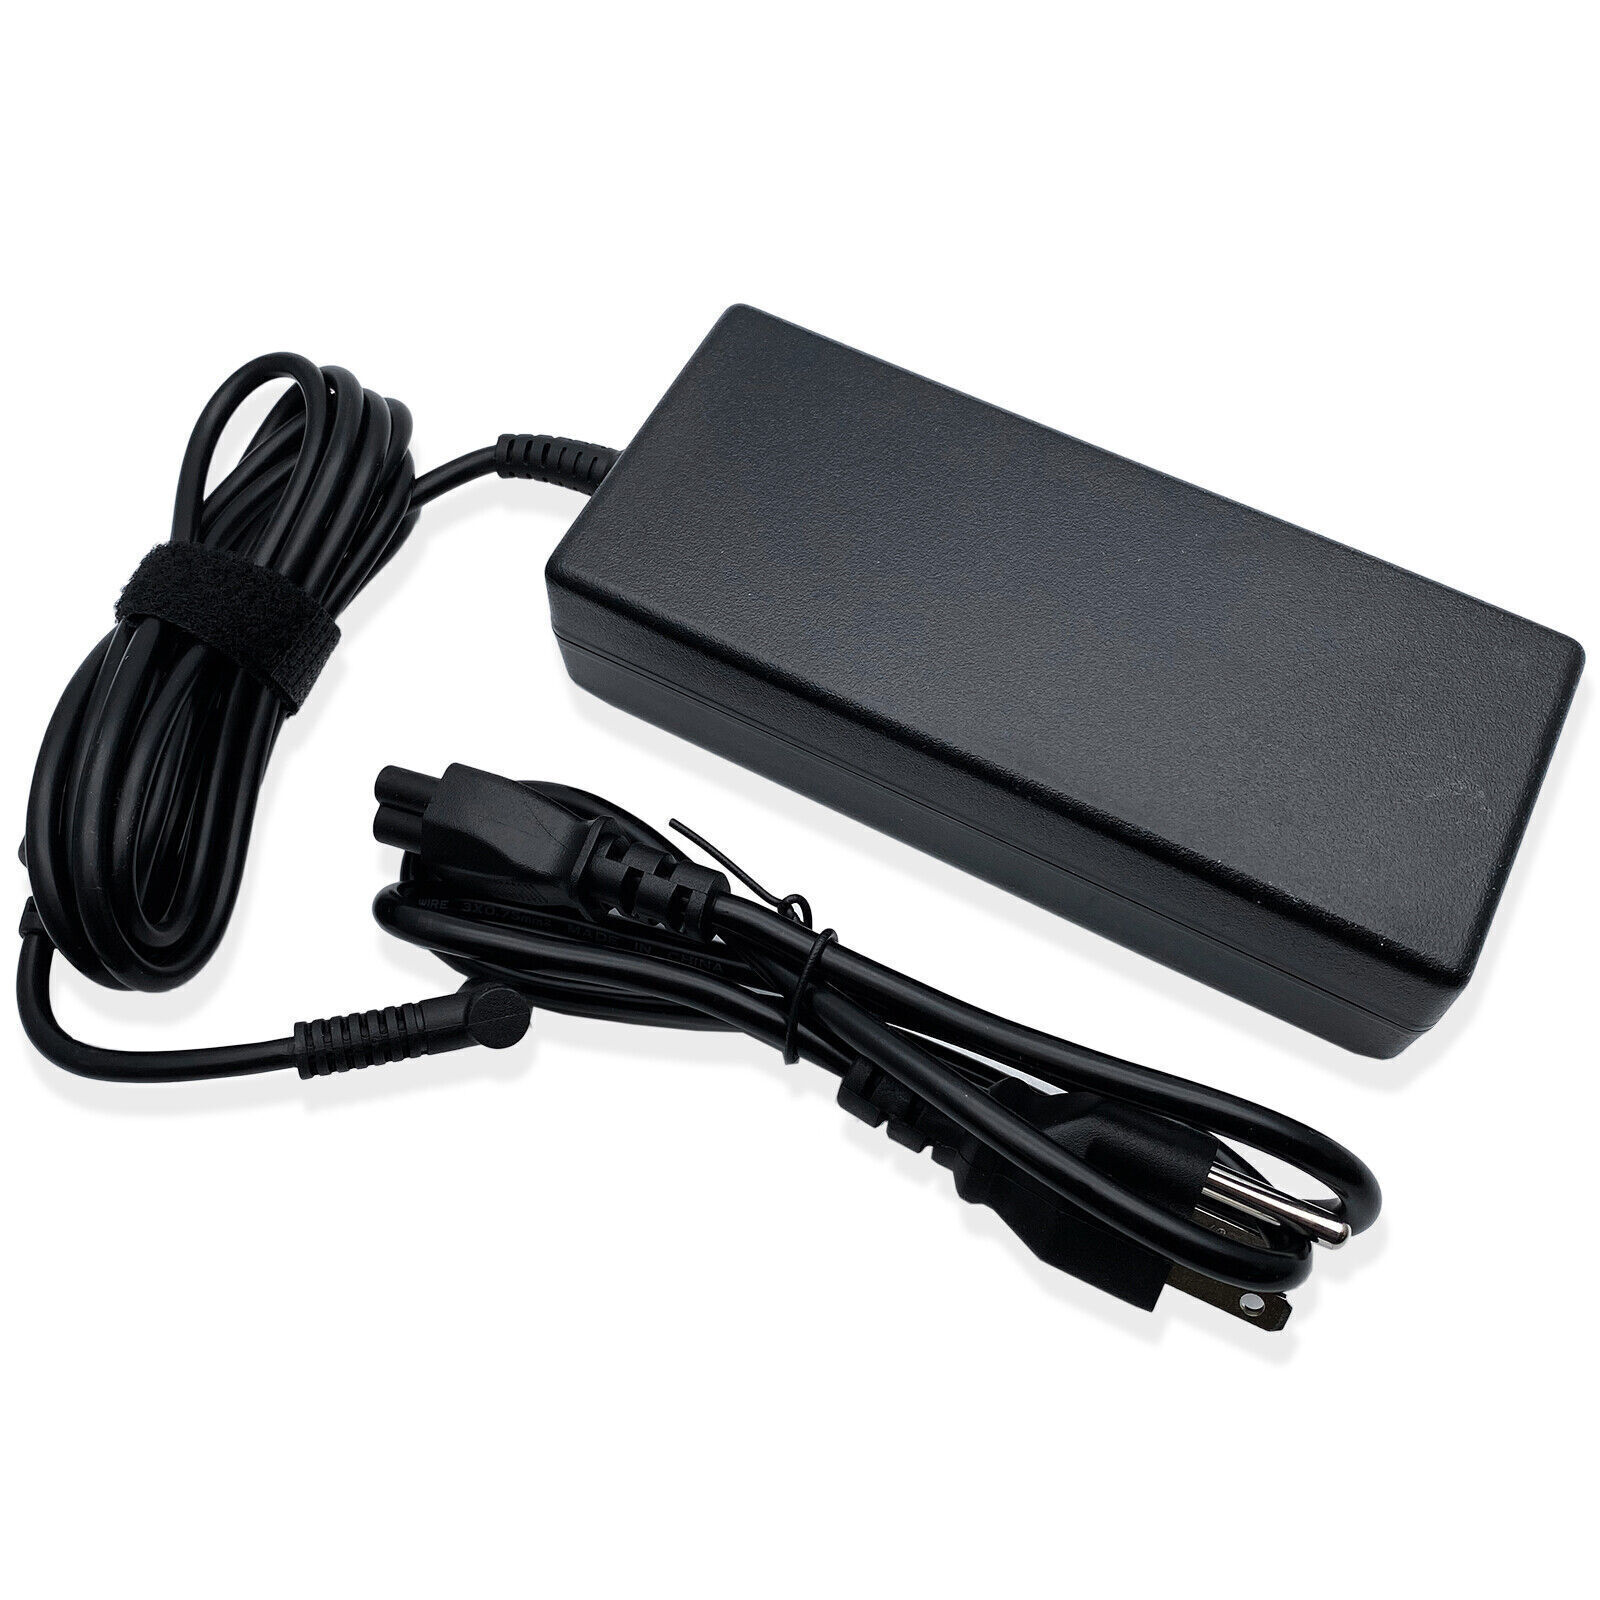 120W AC Adapter L41423-001 for HP G5 Docking Station HSN-IX02 dock Power Supply